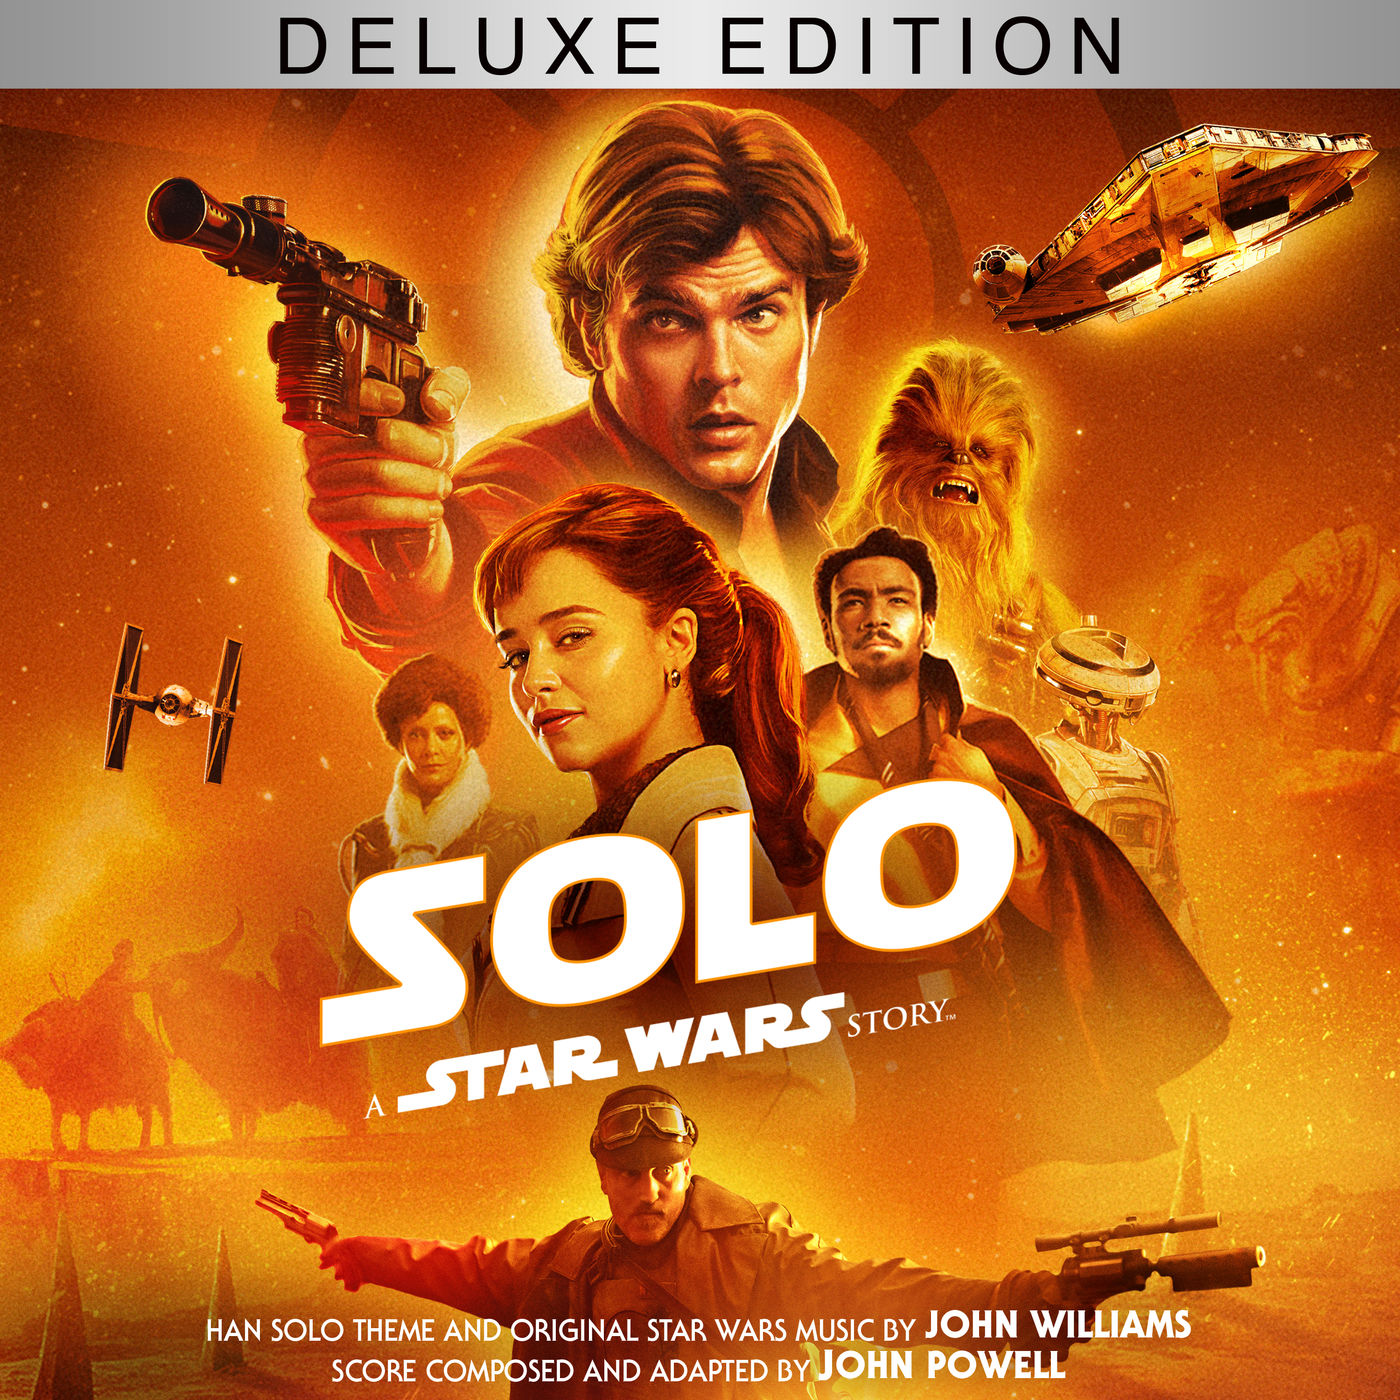 John Powell - Solo: A Star Wars Story [Deluxe Edition] (2020) [FLAC 24bit/192kHz]